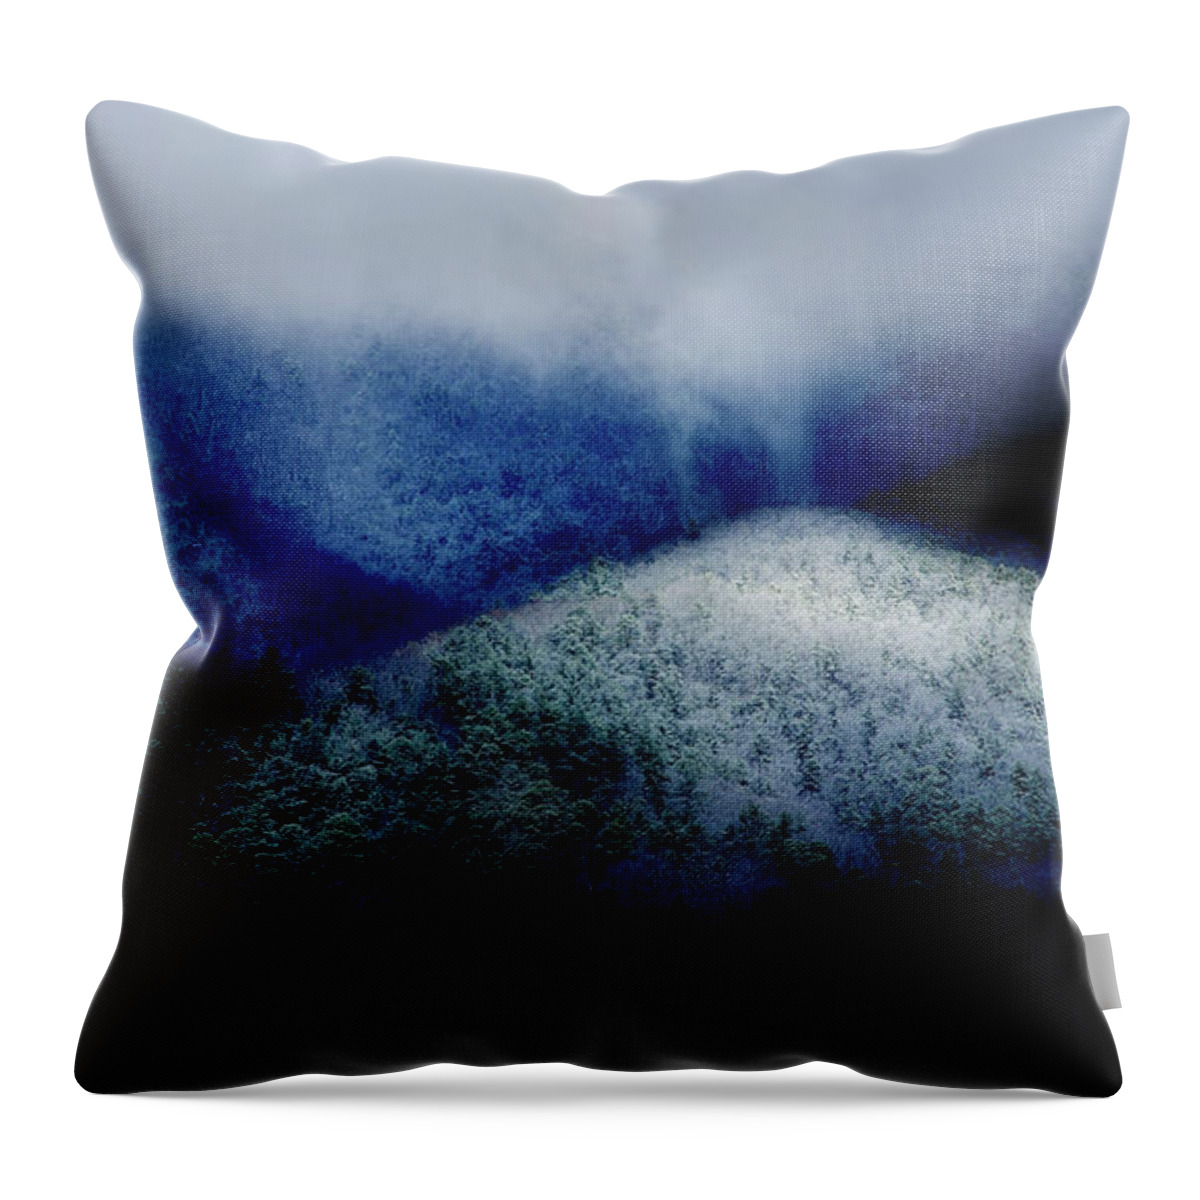 Smoky Mountains Throw Pillow featuring the photograph Smoky Mountain Abstract by Mike Eingle